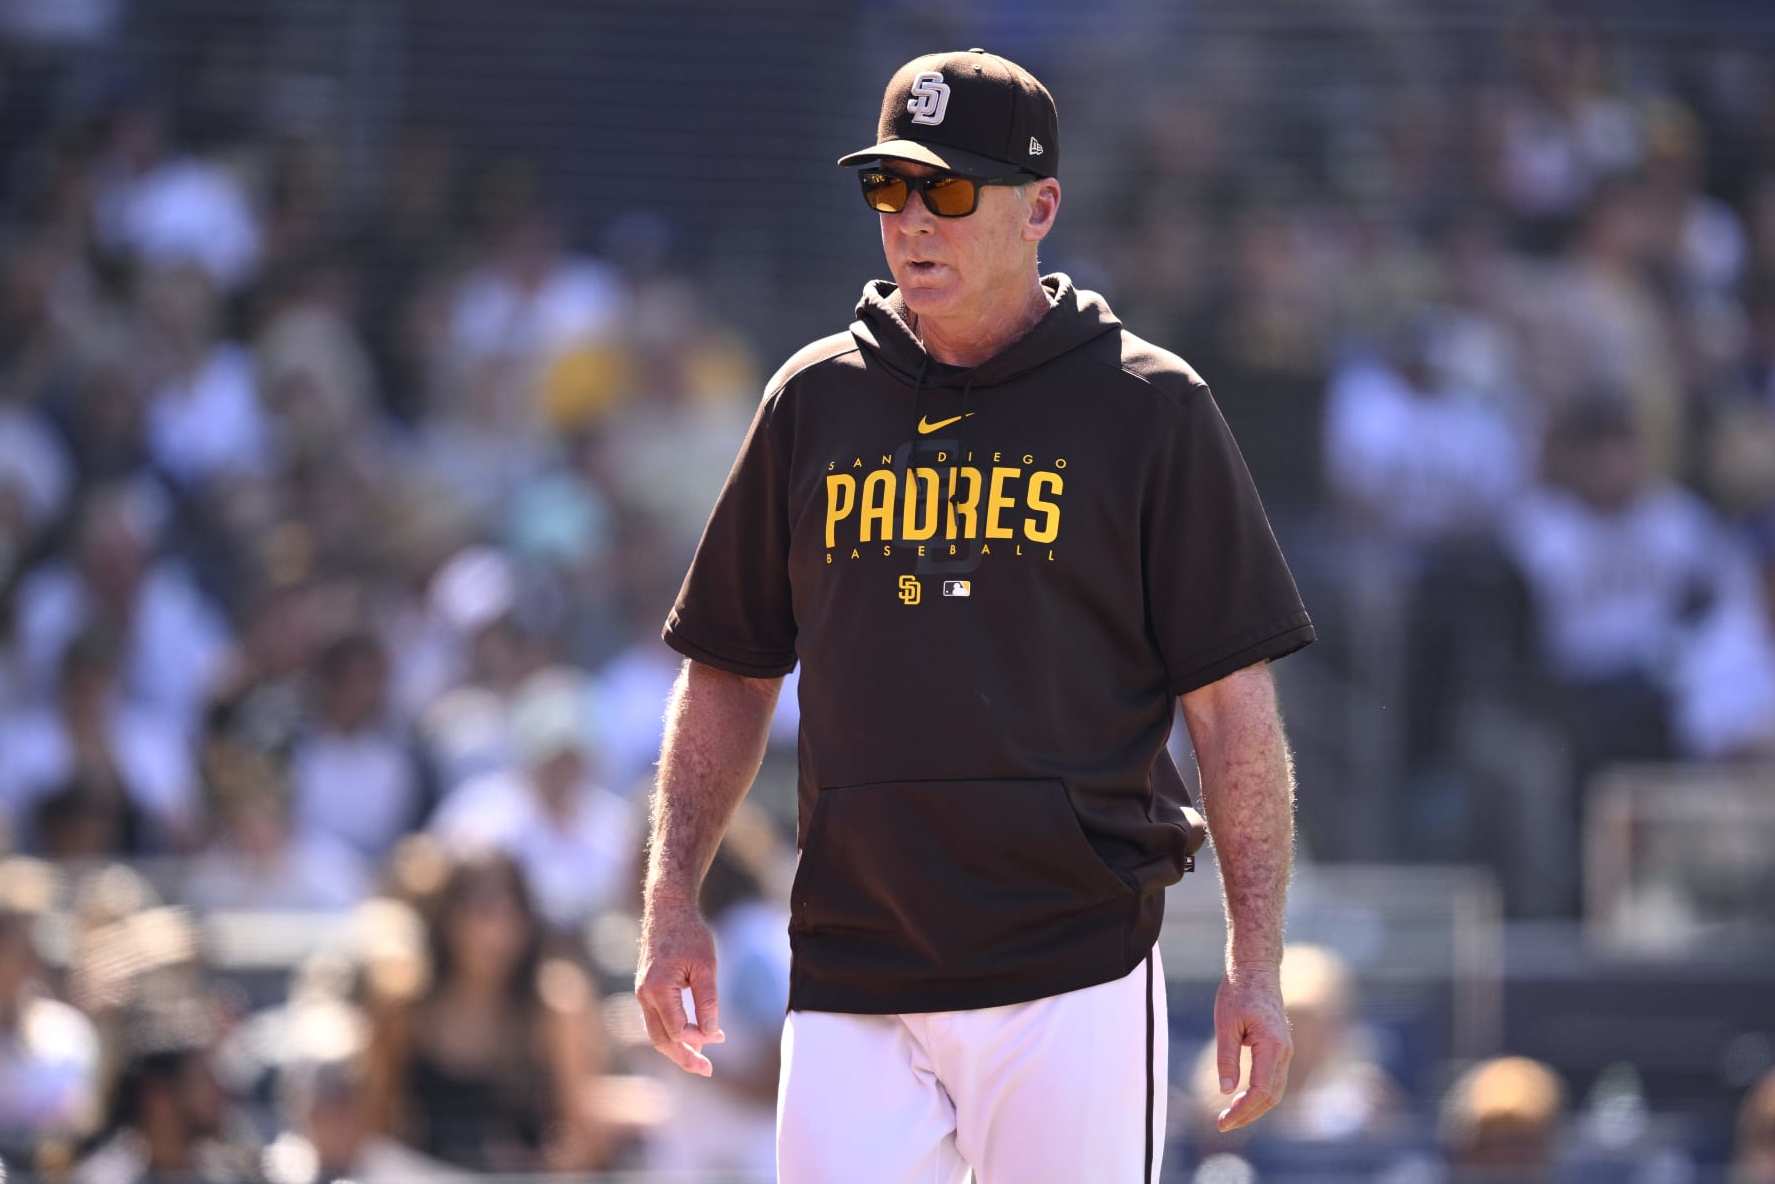 Fed who led steroid probe questions Mark McGwire's return to St